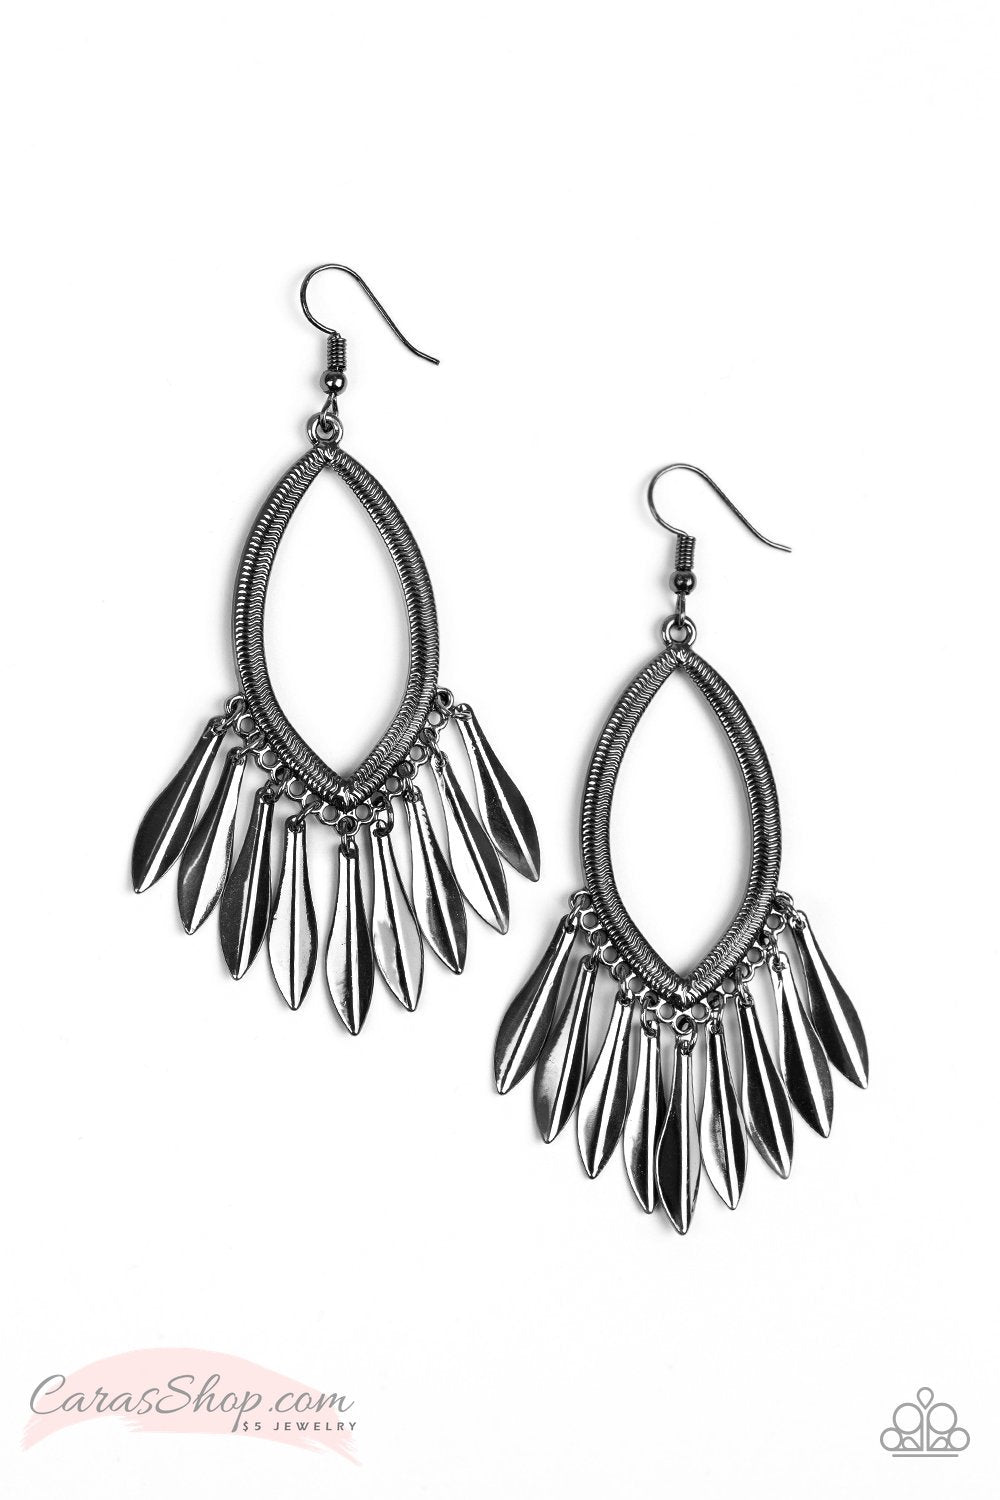 My FLAIR Lady Black Gunmetal Earrings - Paparazzi Accessories-CarasShop.com - $5 Jewelry by Cara Jewels